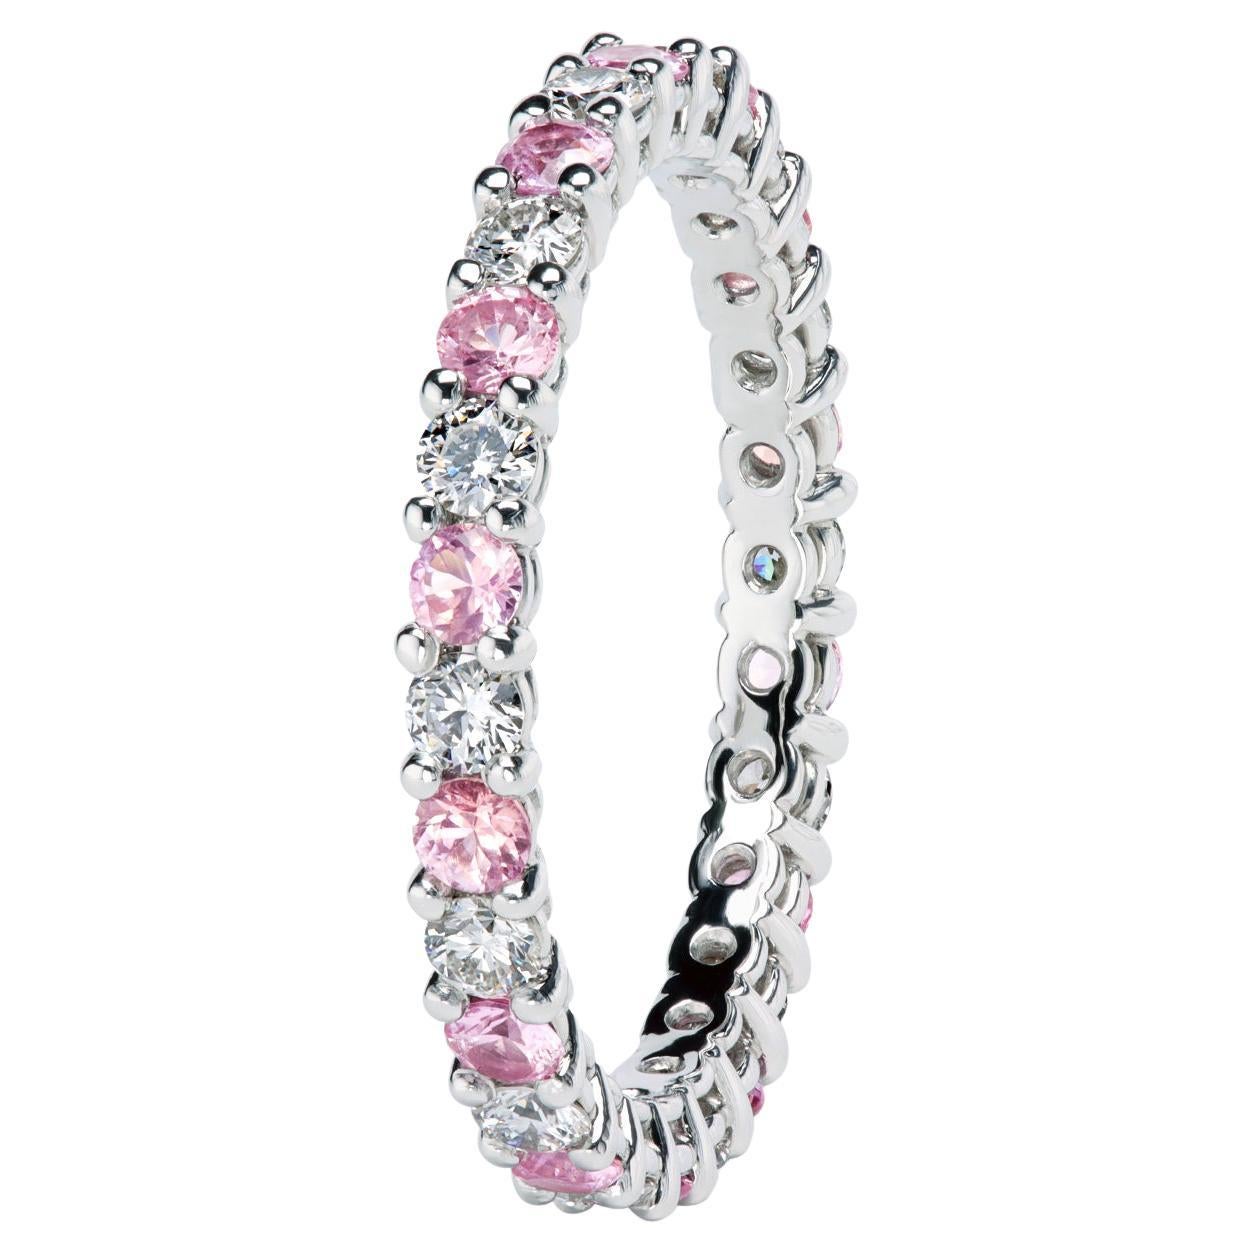 “Grace“ wedding band with diamonds and pink sapphires by Leon Mege